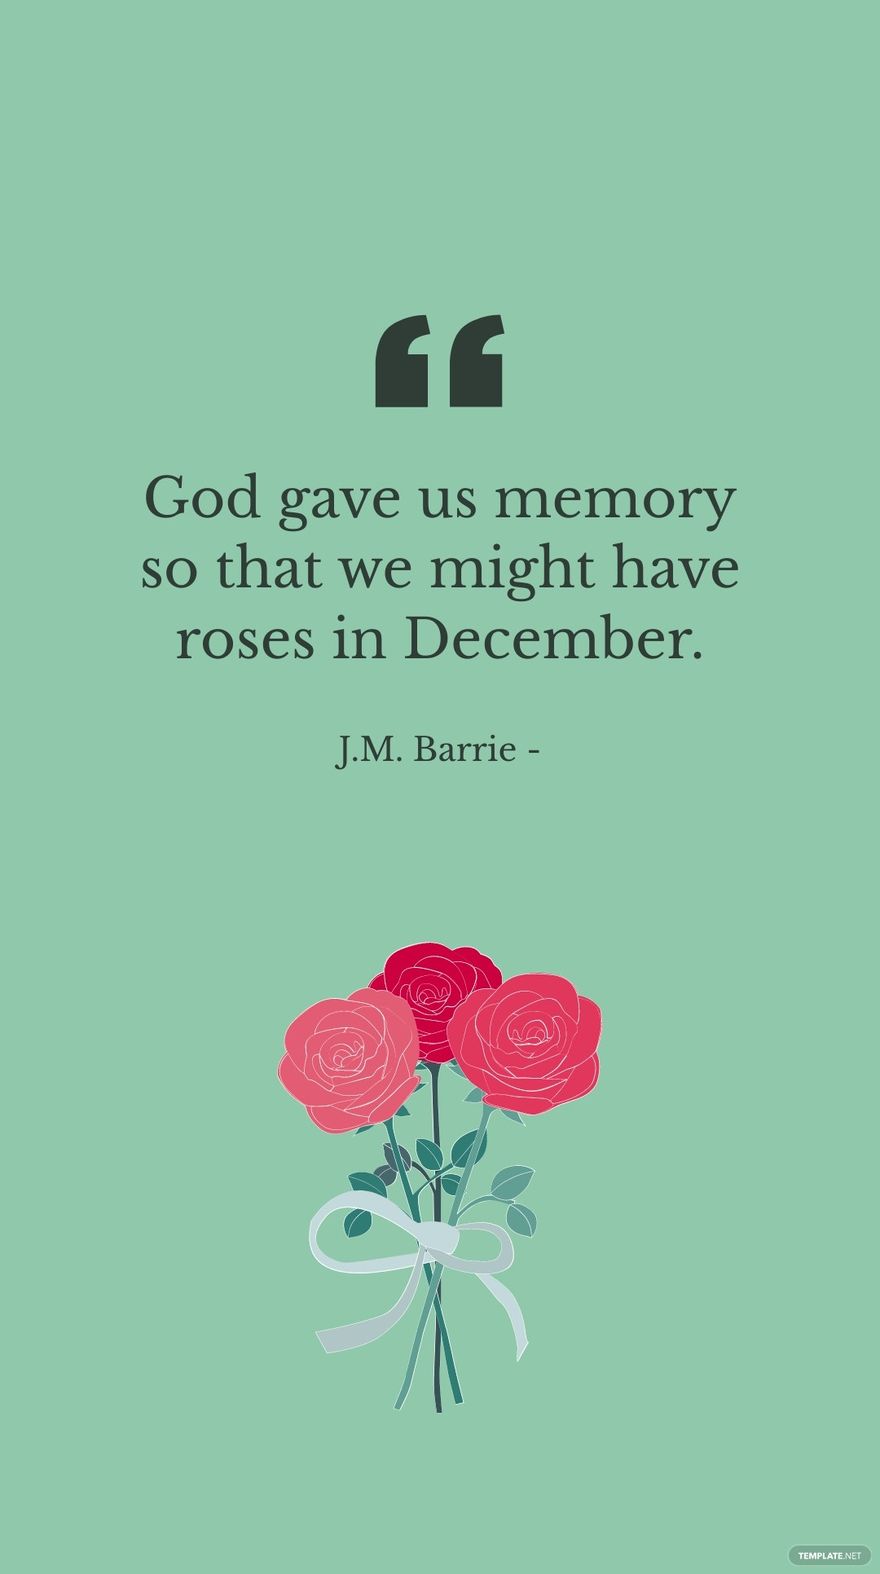 J.M. Barrie - God gave us memory so that we might have roses in December. in JPG